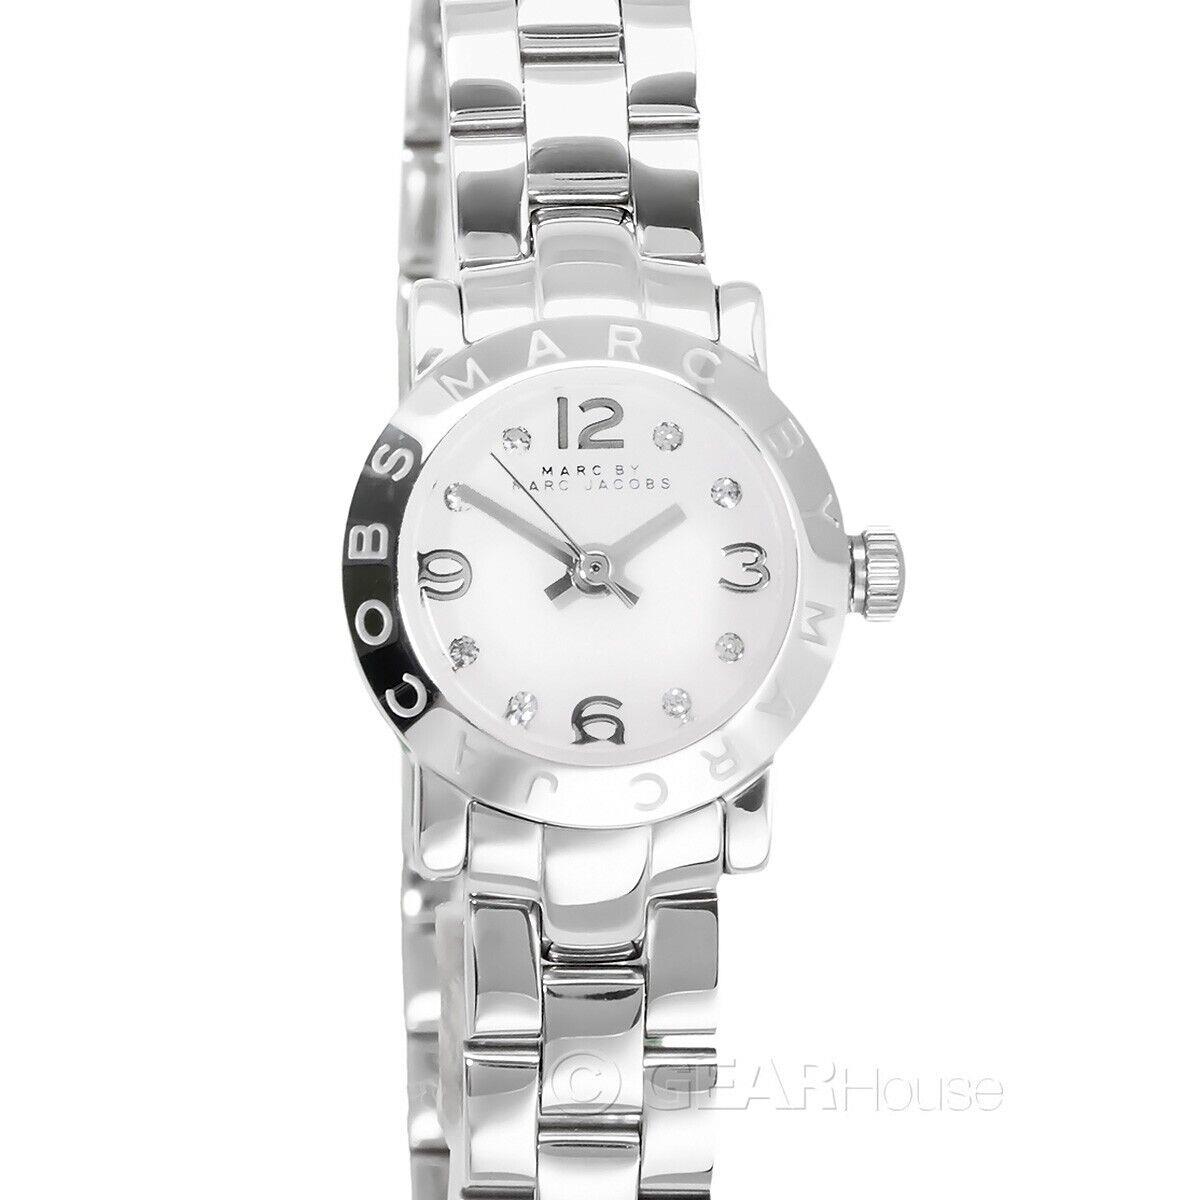 Marc by Marc Jacobs Womens Petite Watch Silver Dial w/ Crystals Stainless Steel